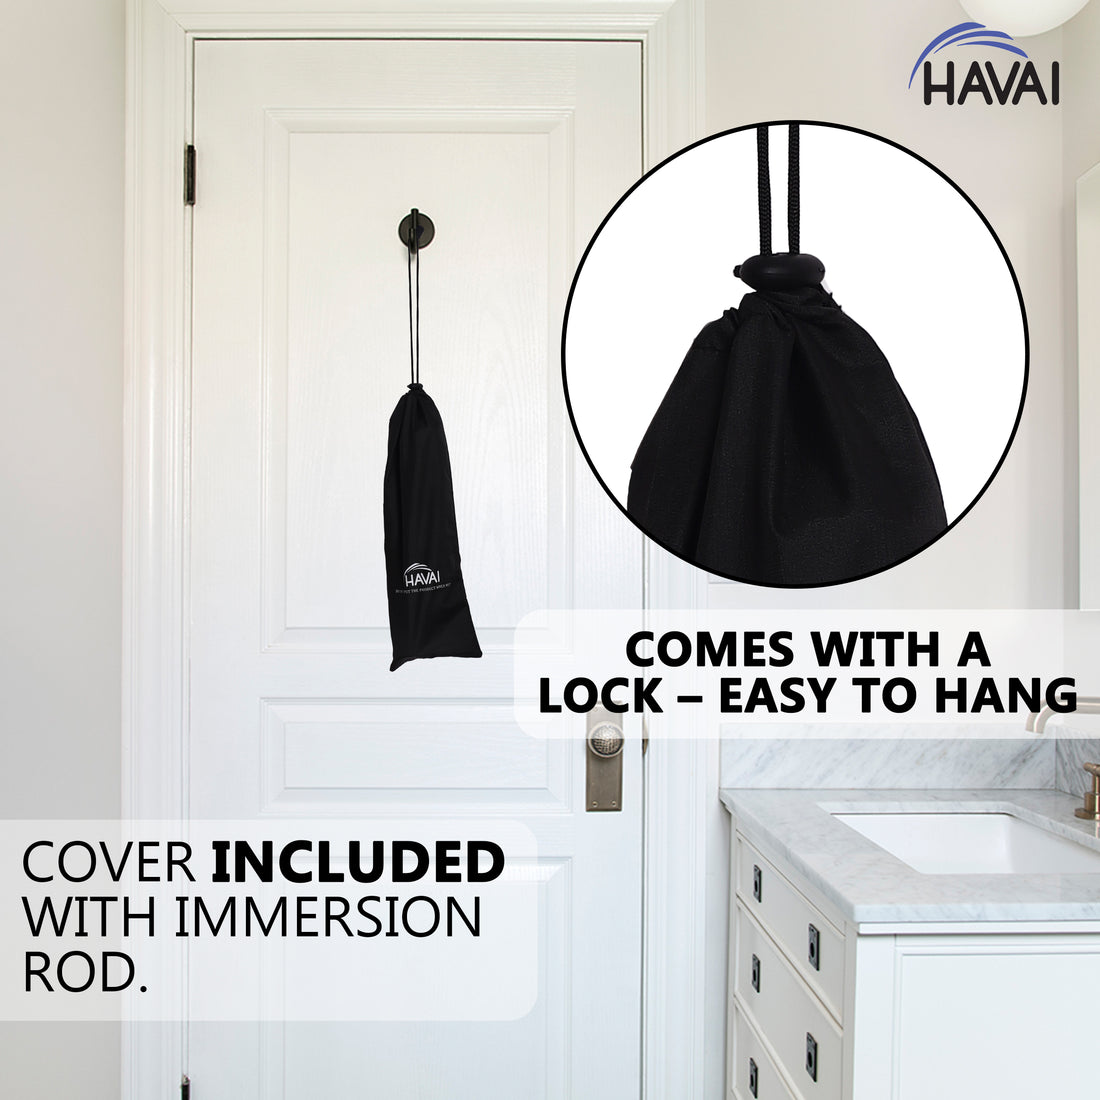 HAVAI Immersion Rod with Cover - Metal, Grey and White, 1500 W